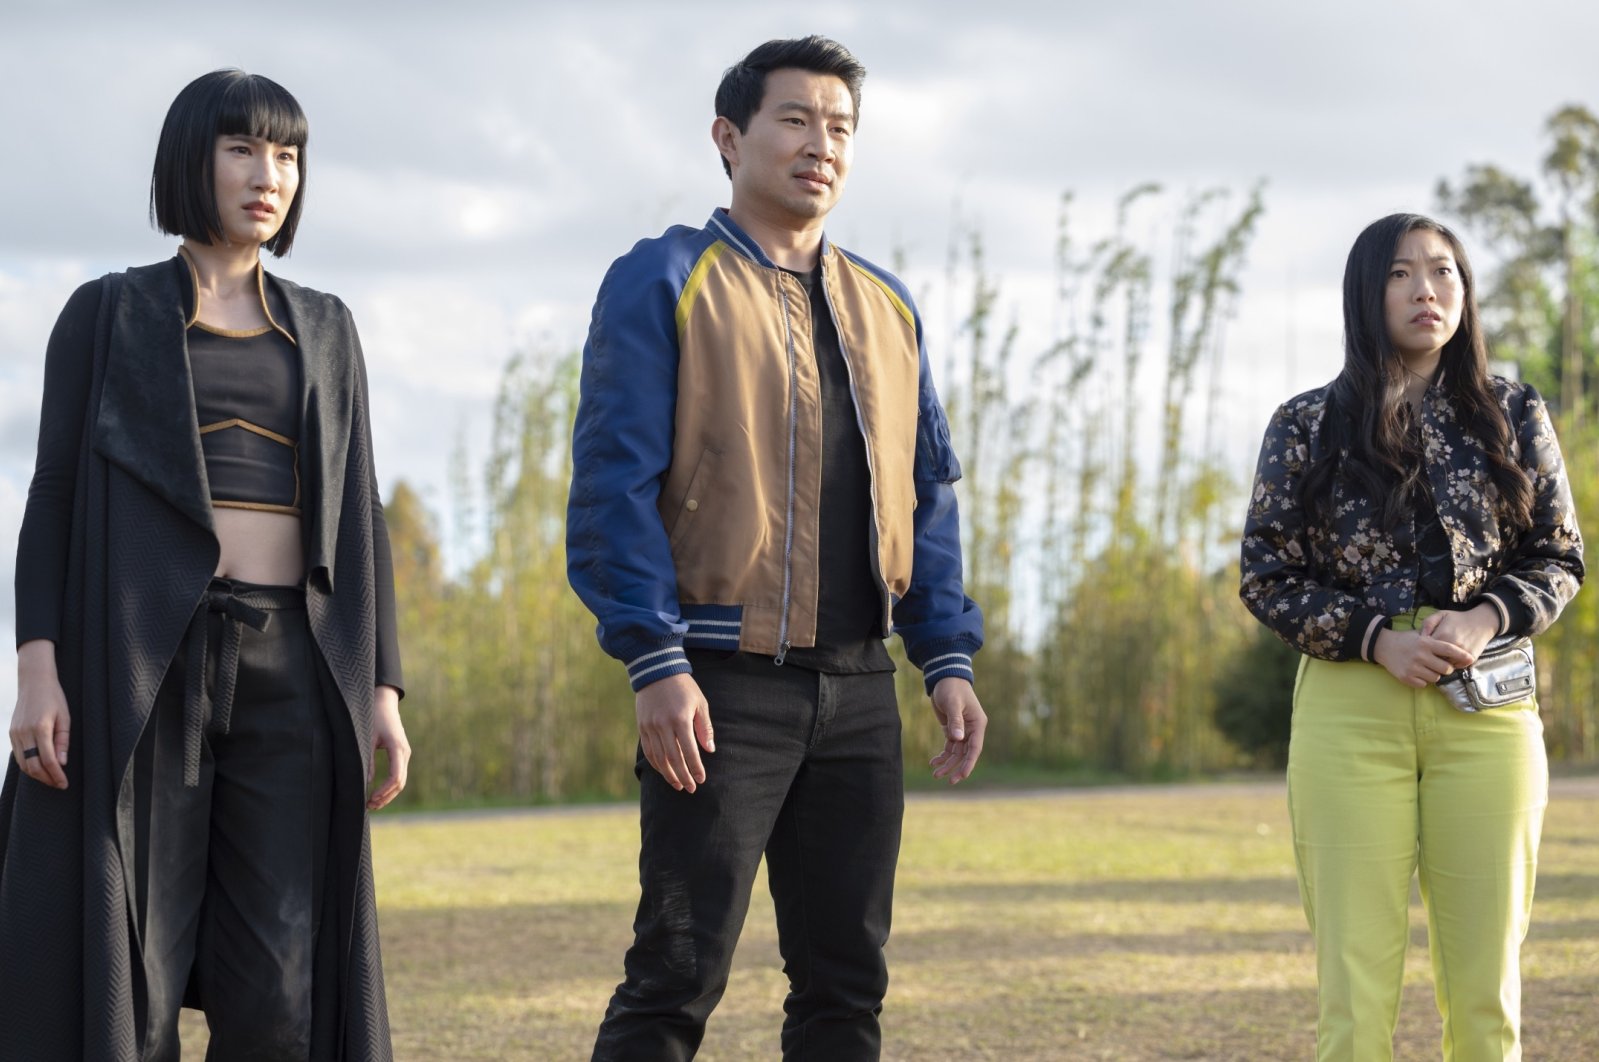 Meng’er Zhang (L), Simu Liu (C) and Awkwafina, in a scene from the film “Shang-Chi and the Legend of the Ten Rings.” (Marvel Studios via AP)